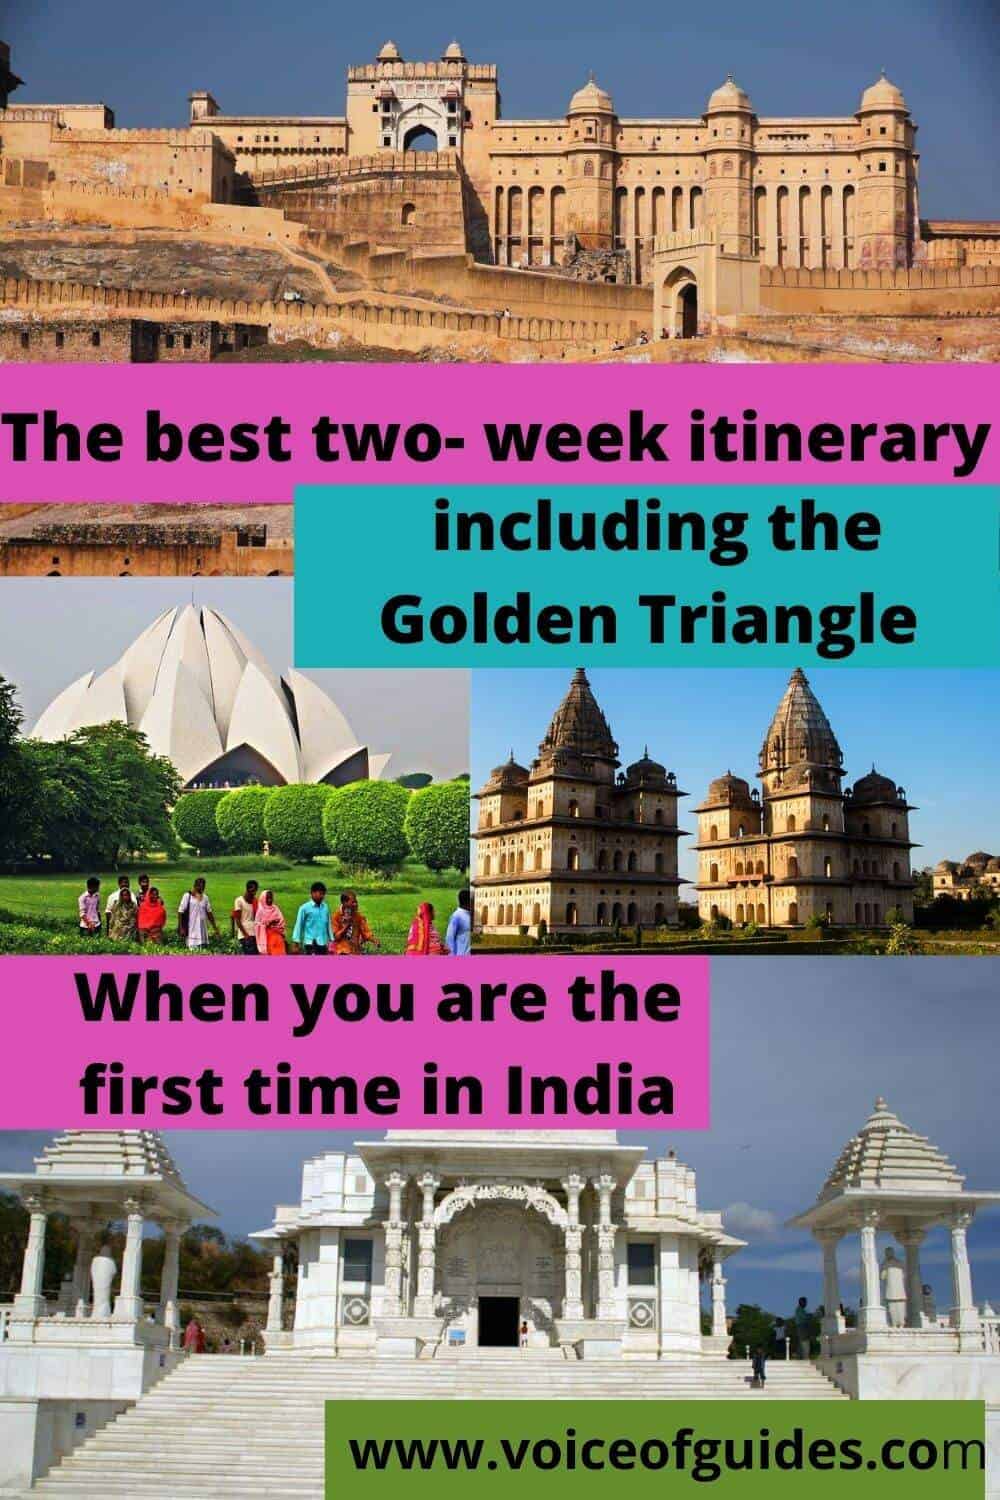 Are you going the first time to India and you have only two-weeks to spend? Based on the advice of tour guides here you find the ultimate two-weeks itinerary for the extended Golden Triangle including Delhi, Agra, Jaipur, Fatehpur Sikri, Orchha, Khajuraho, Varanasi and Amritsar